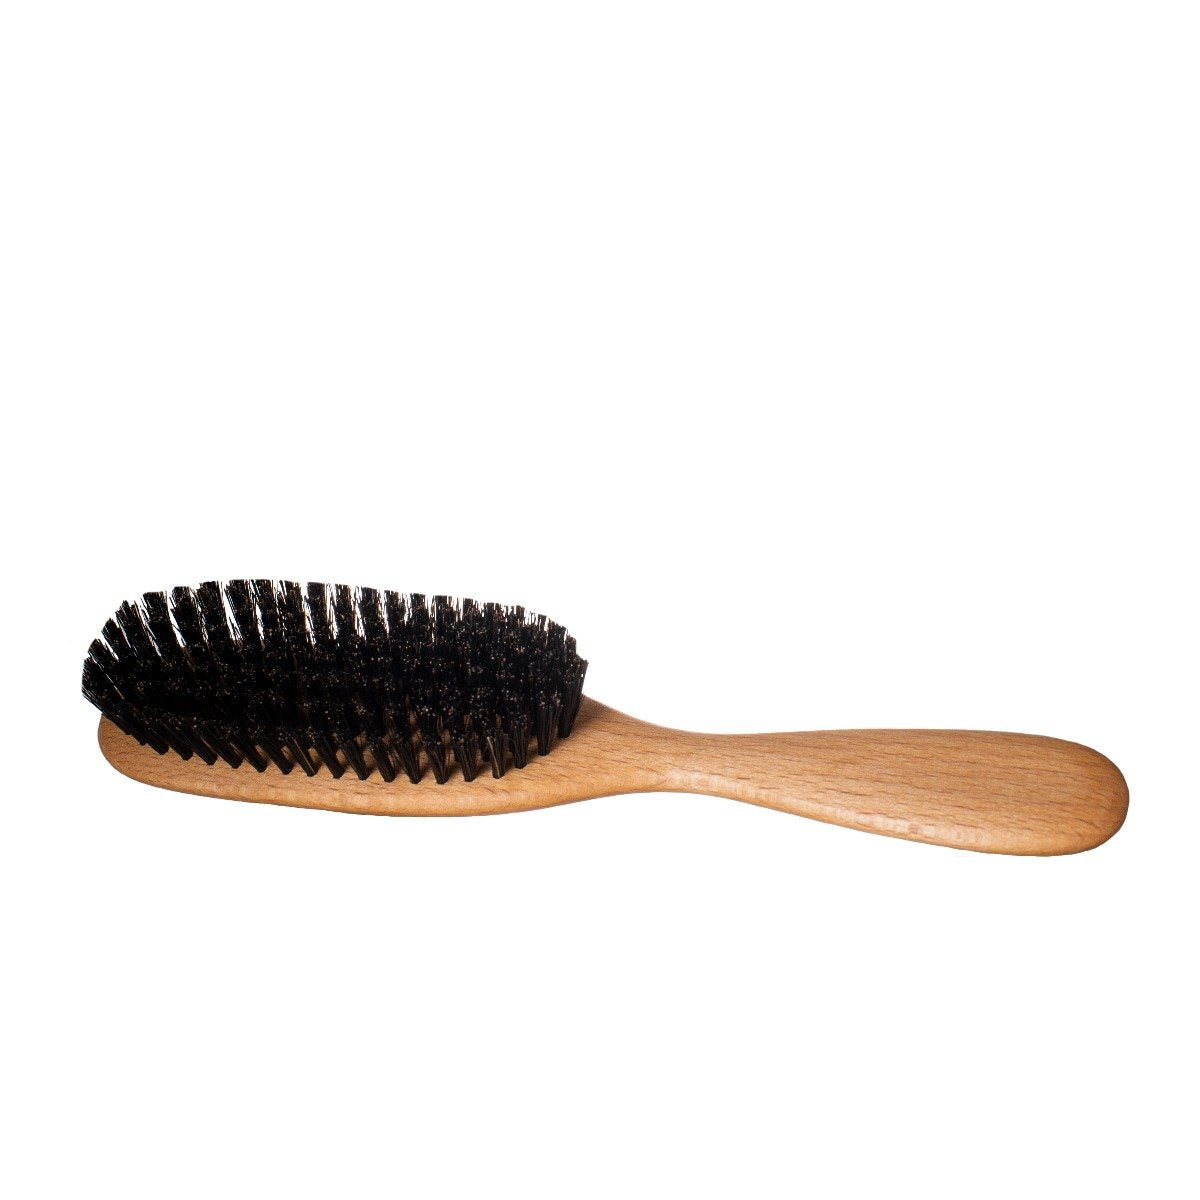 Amazon.com : GranNaturals Boar Bristle Slick Back Hair Brush - Soft/Medium  Smoothing Hairbrush to Style, Polish, & Lay Hair Down Flat to Create a  Sleek Frizz Free Hairstyle for Women and Men -